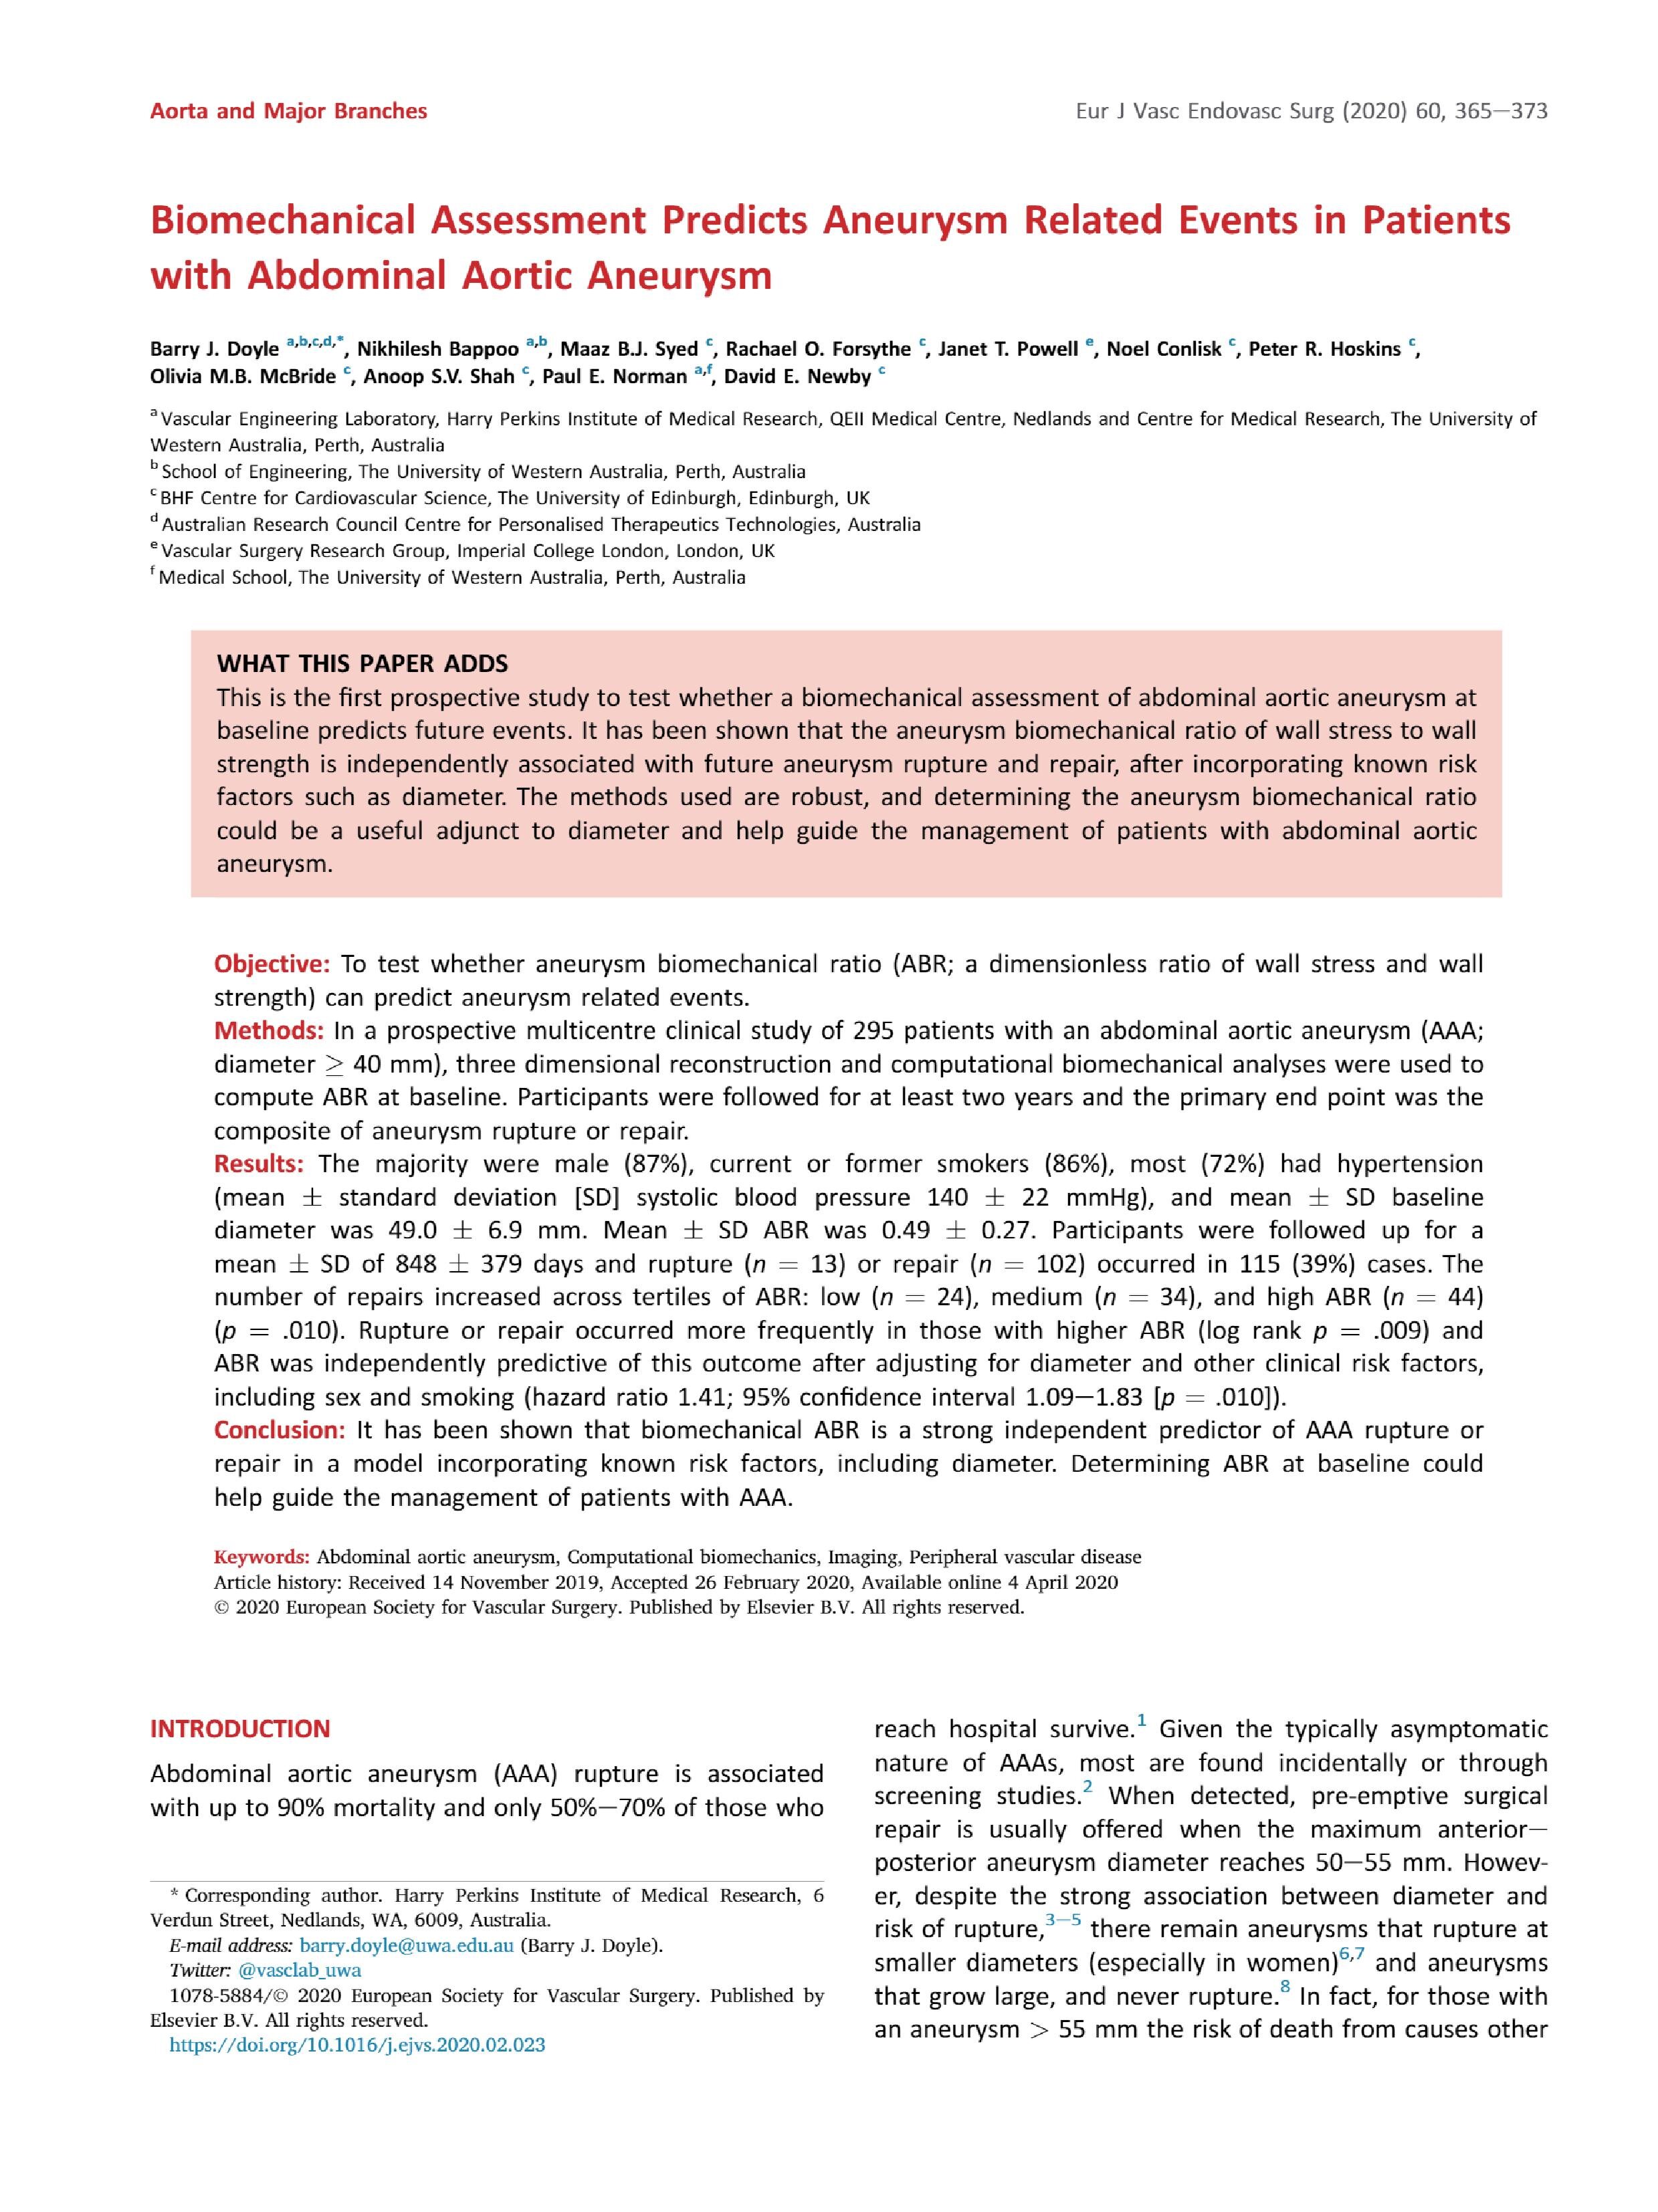 Biomechanical Assessment Predicts Aneurysm Related Events in Patients with Abdominal Aortic Aneurysm  pg1-page-001.jpg